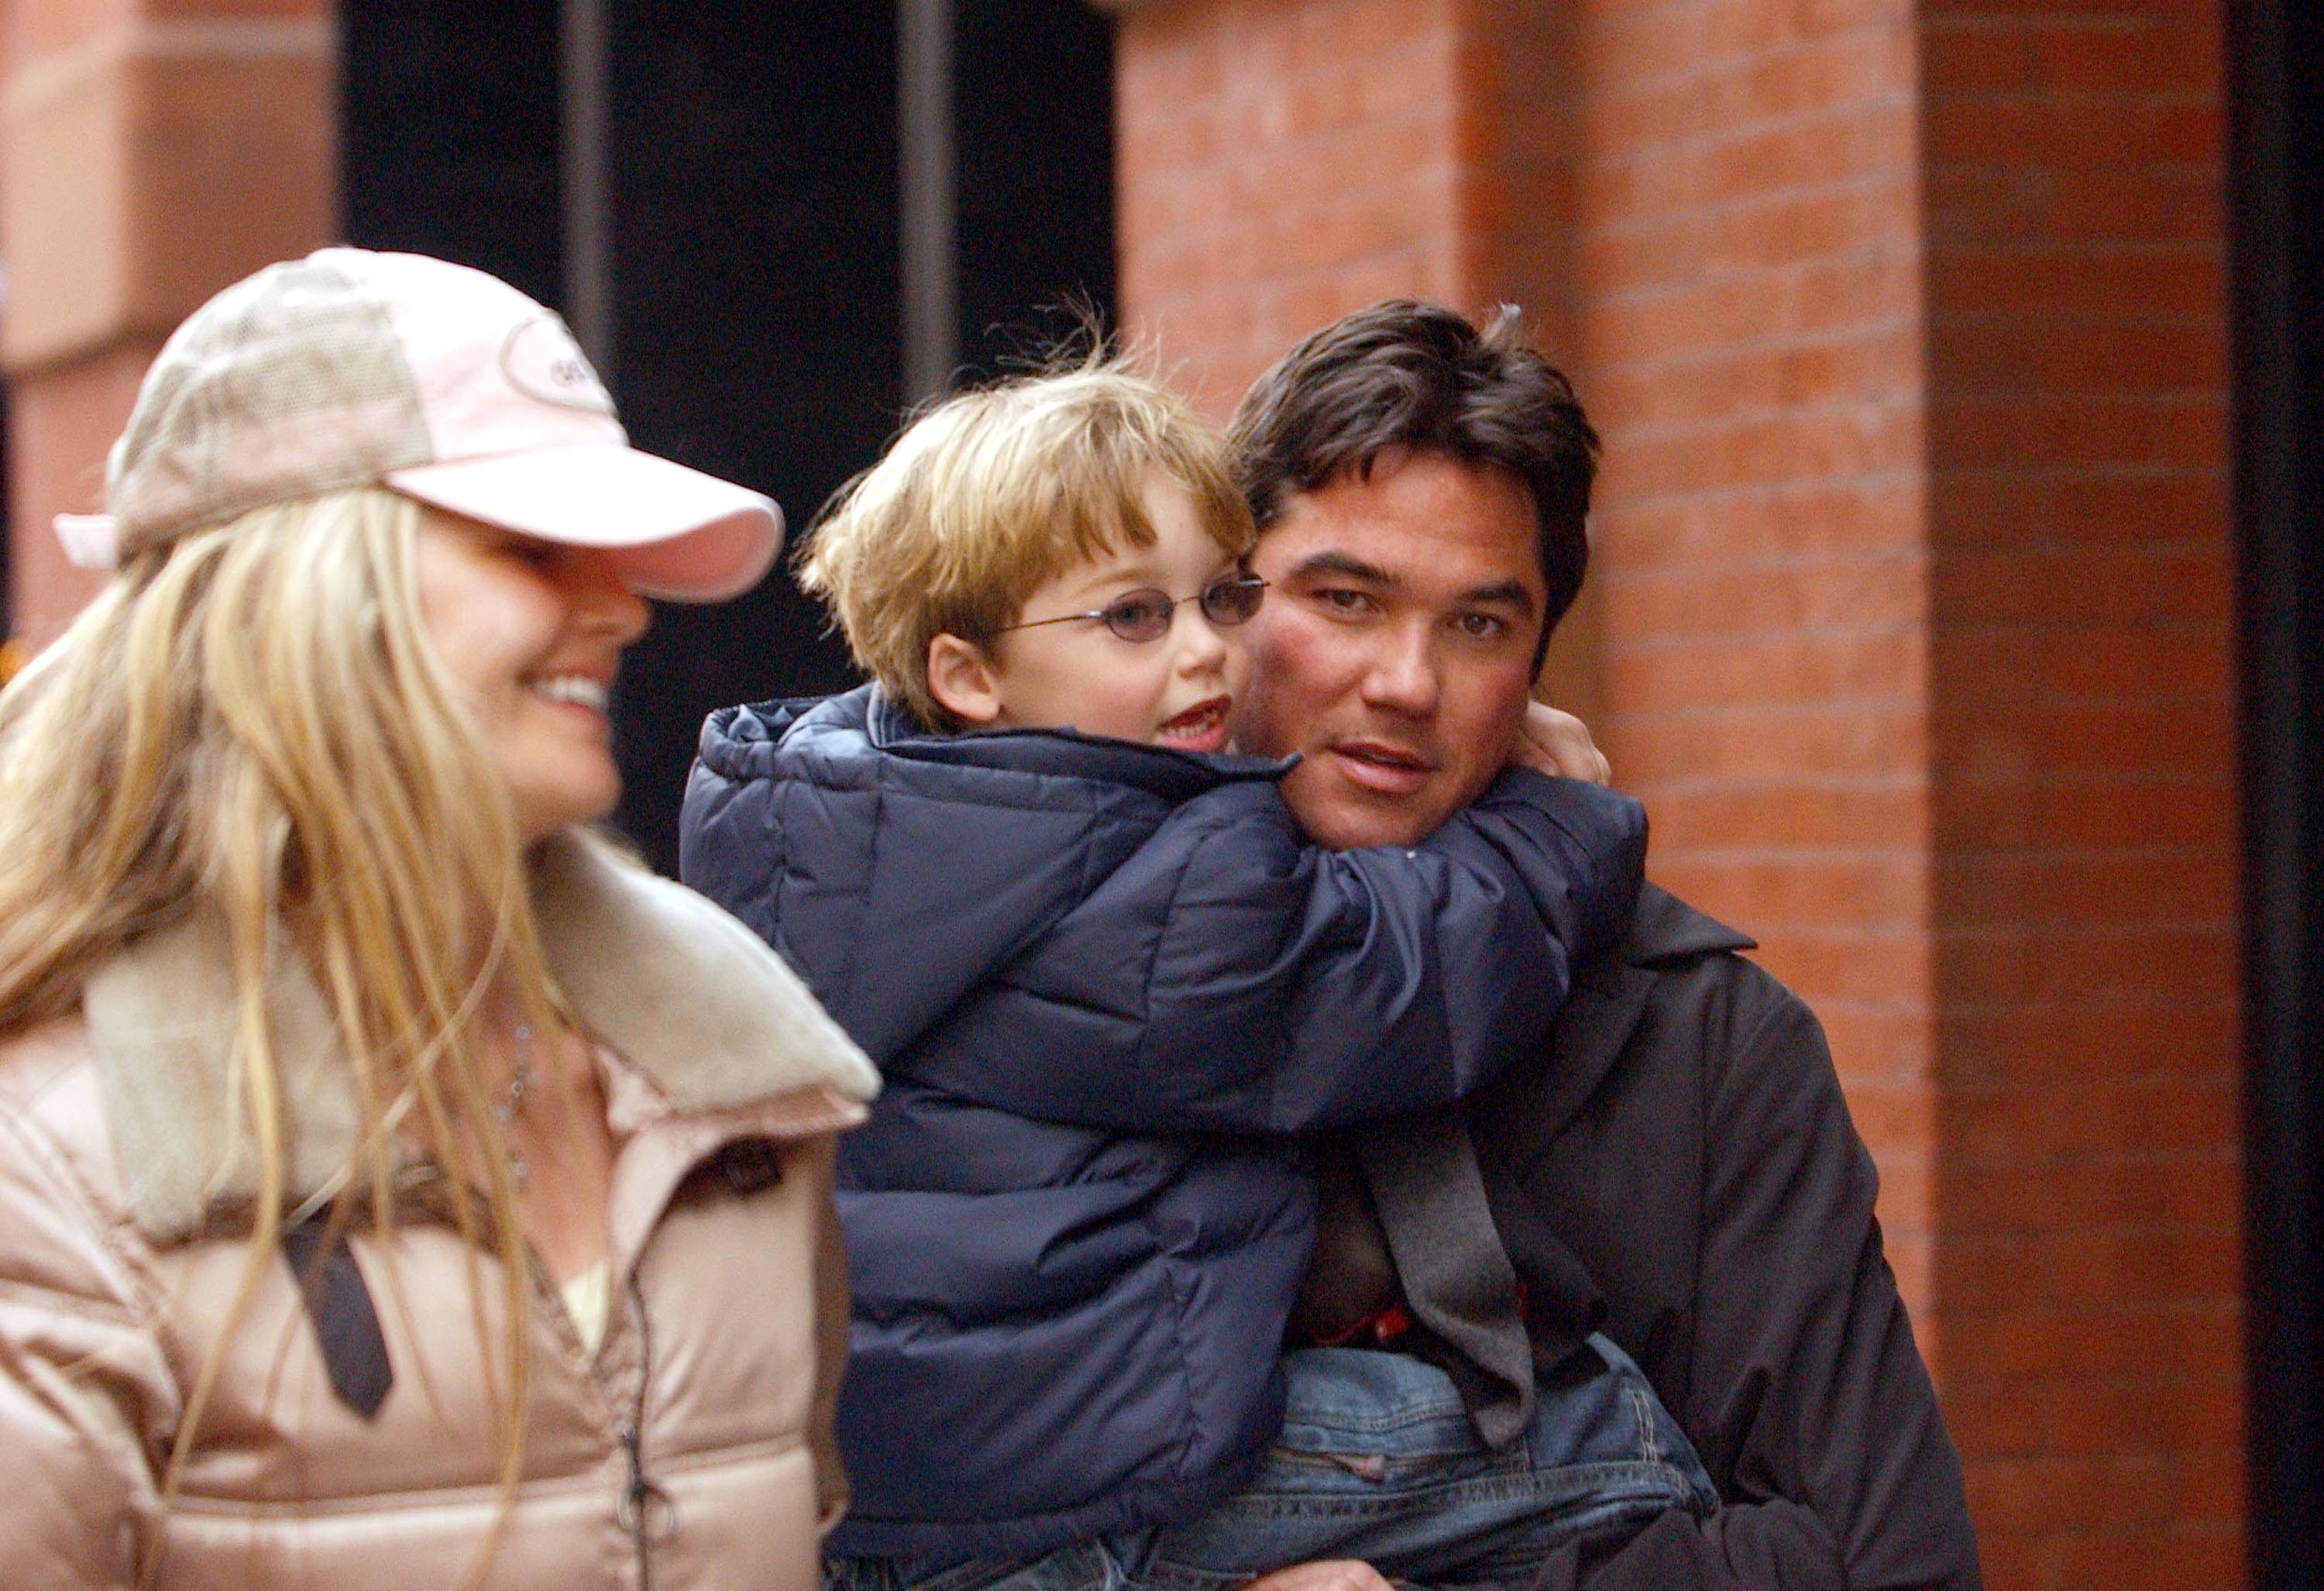 Dean Cain walking in the West Village with his son Christopher Cain and Samantha Torres on March 17, 2005, in New York City | Source: Getty Images